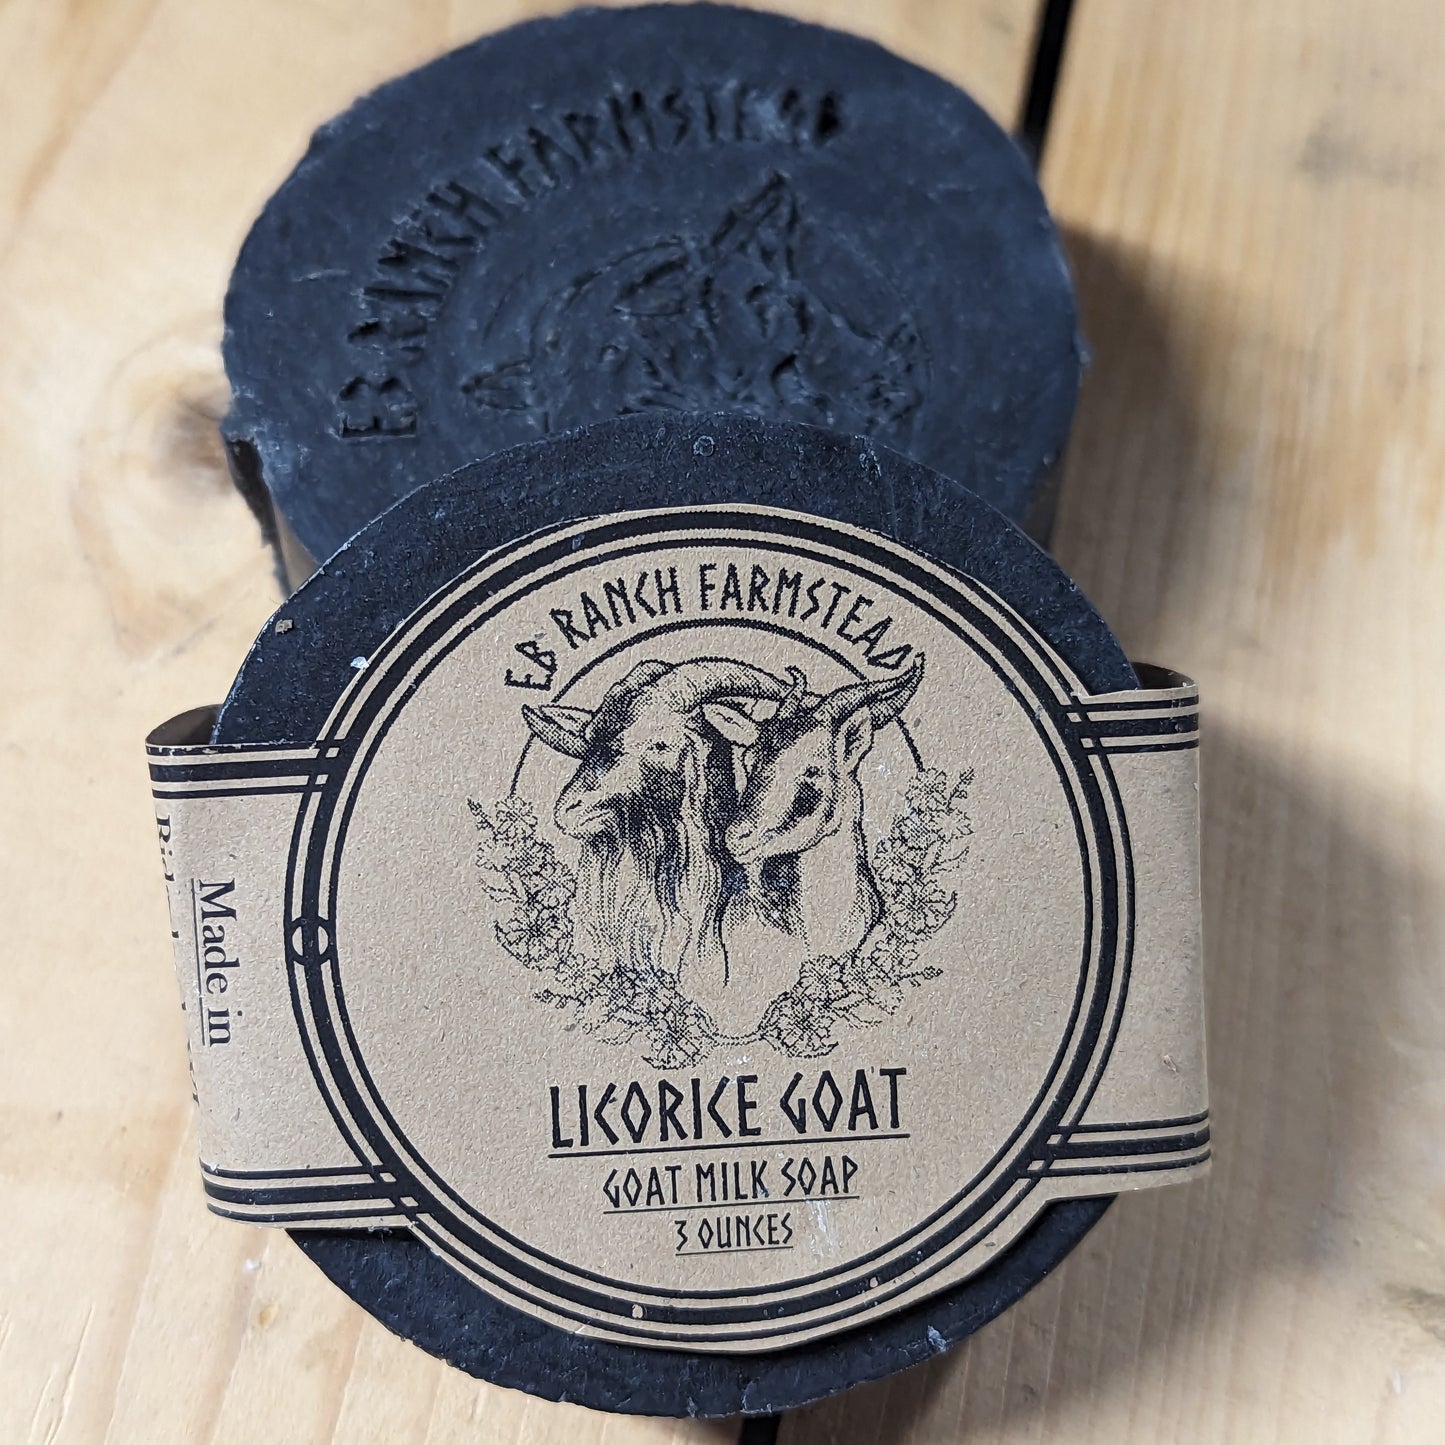 Bar of Wild Haven Farm's Licorice goat milk soap made with San Clemente Island goat milk